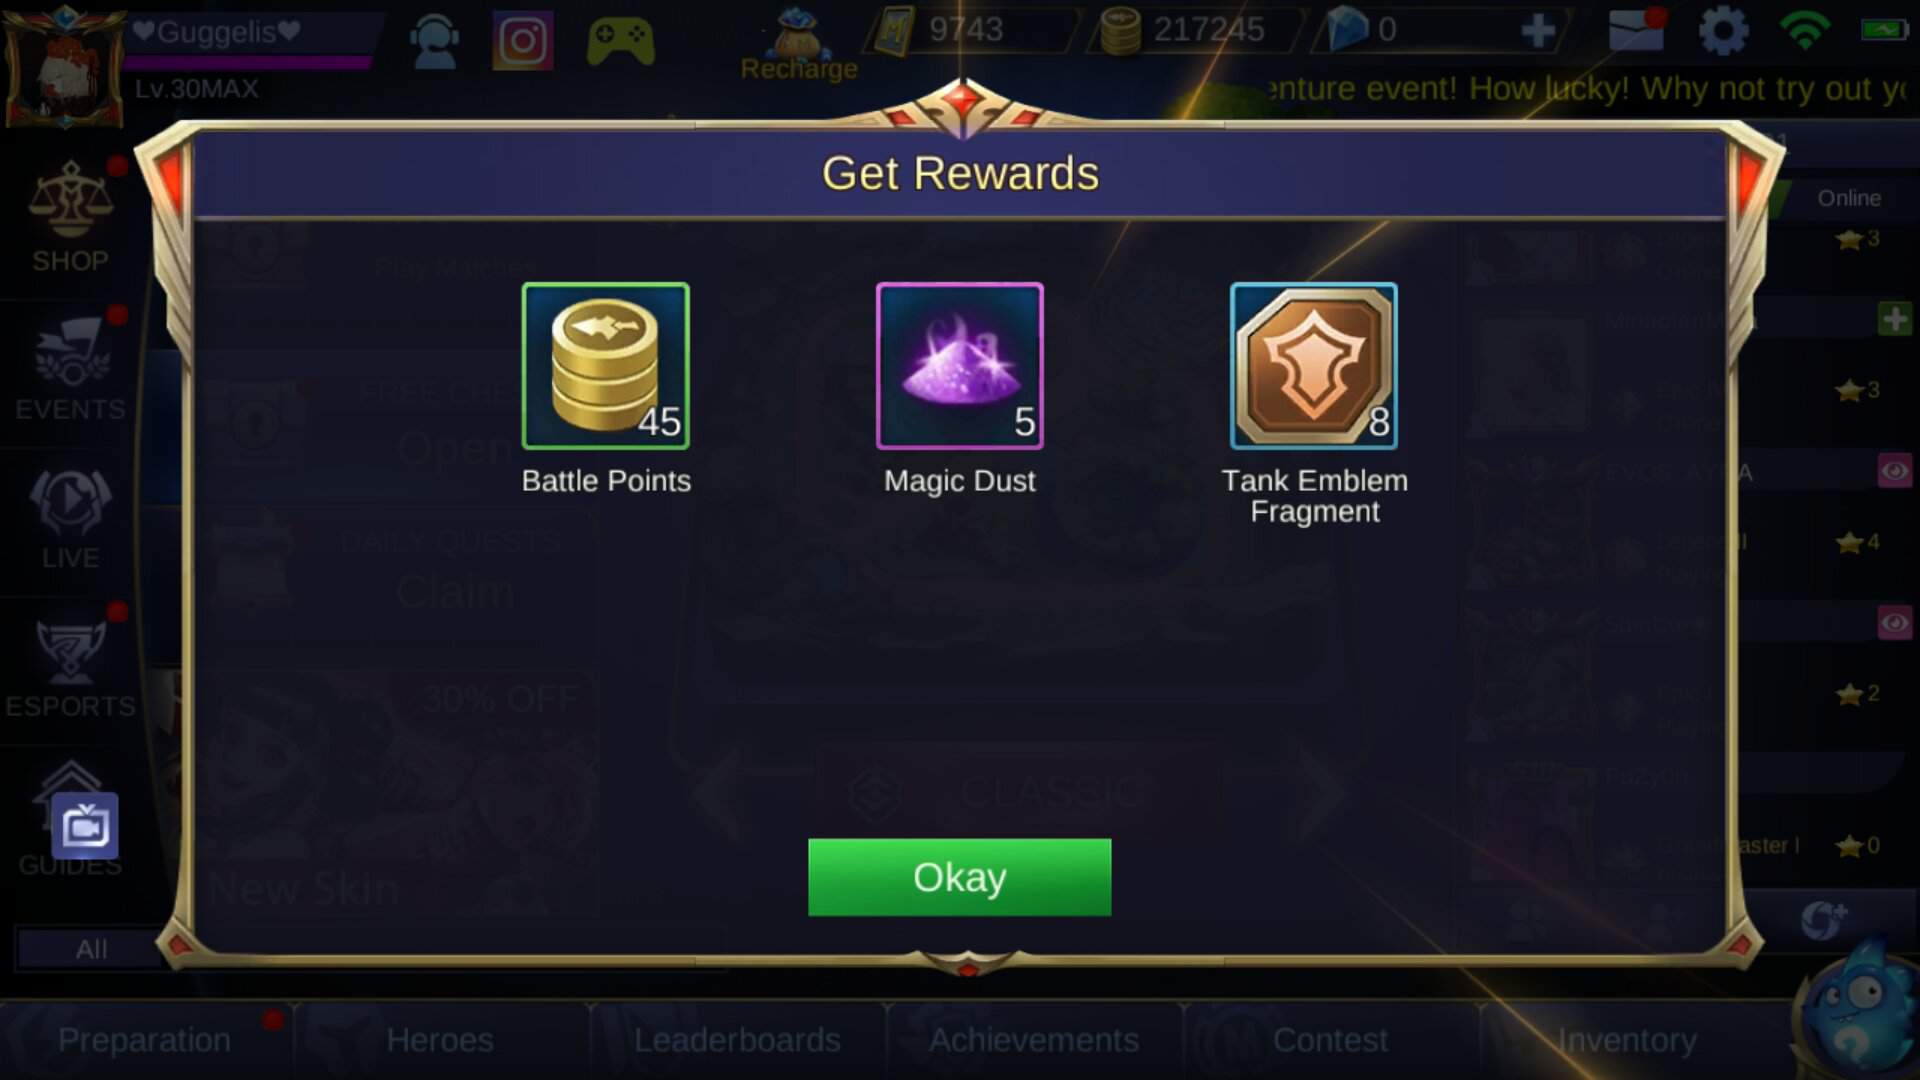 Learn How to Earn BP Easily and Quickly in Mobile Legends